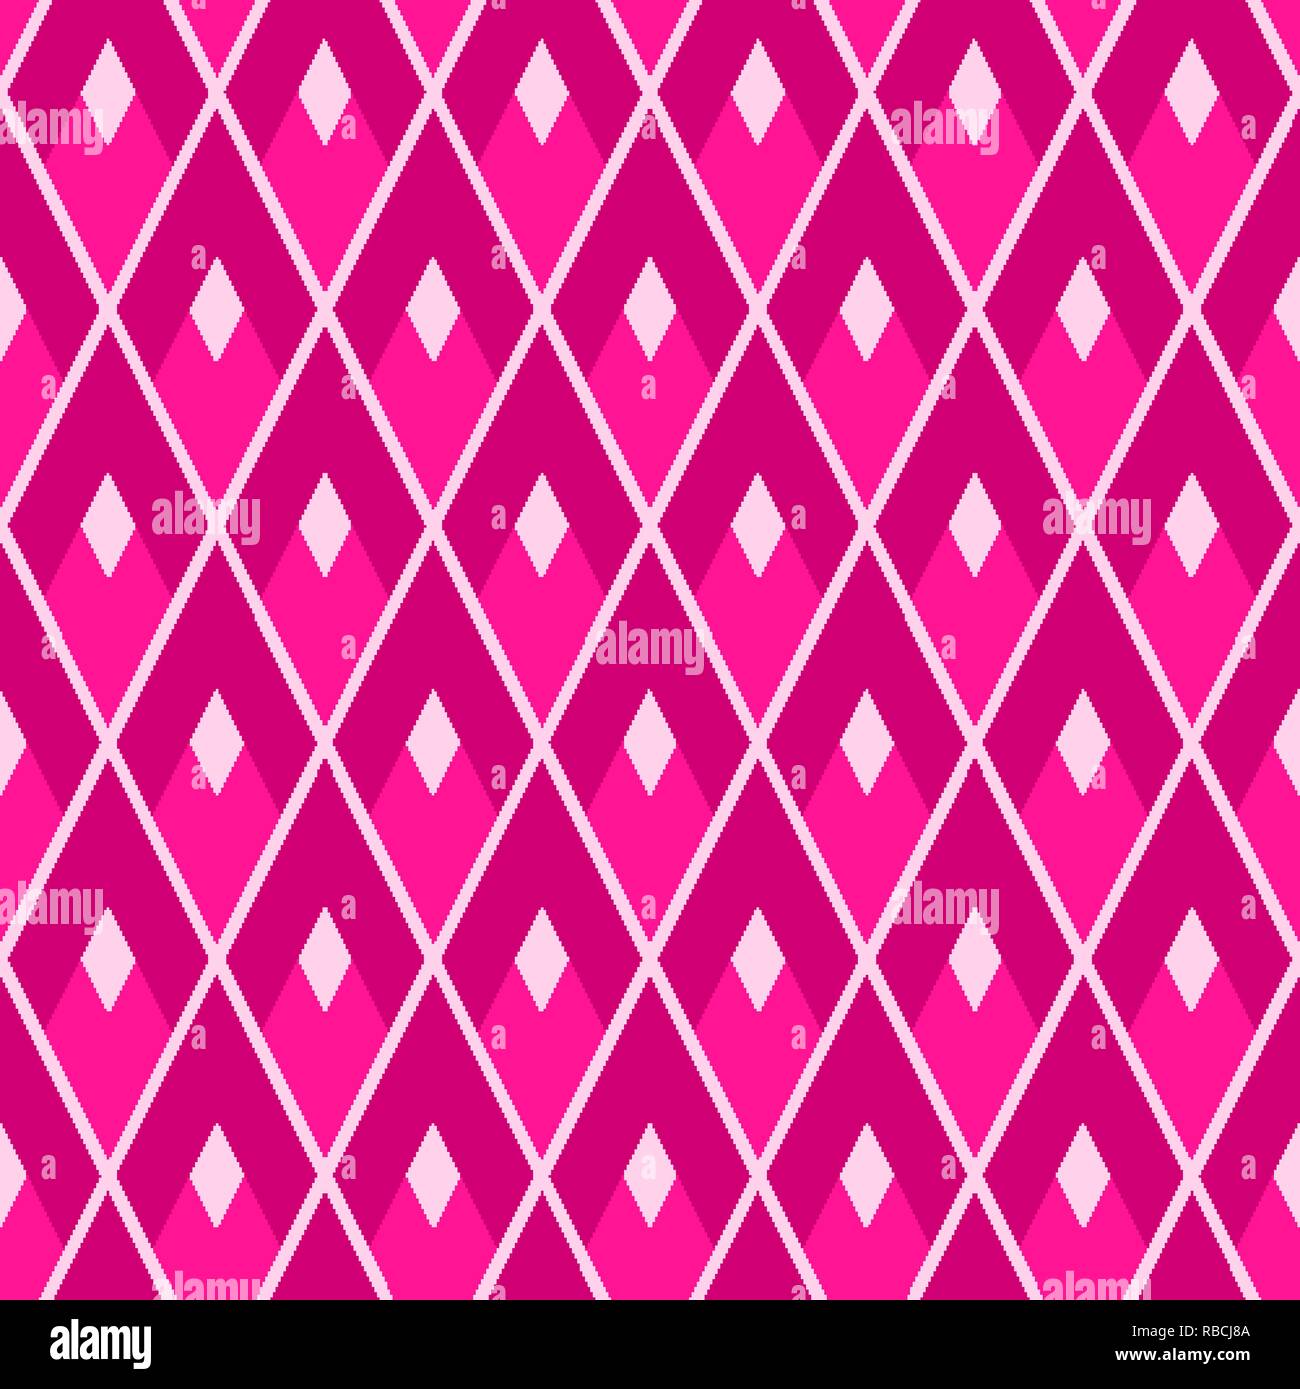 Abstract geometric seamless tile pattern with pink lozenges with acute angles Stock Vector